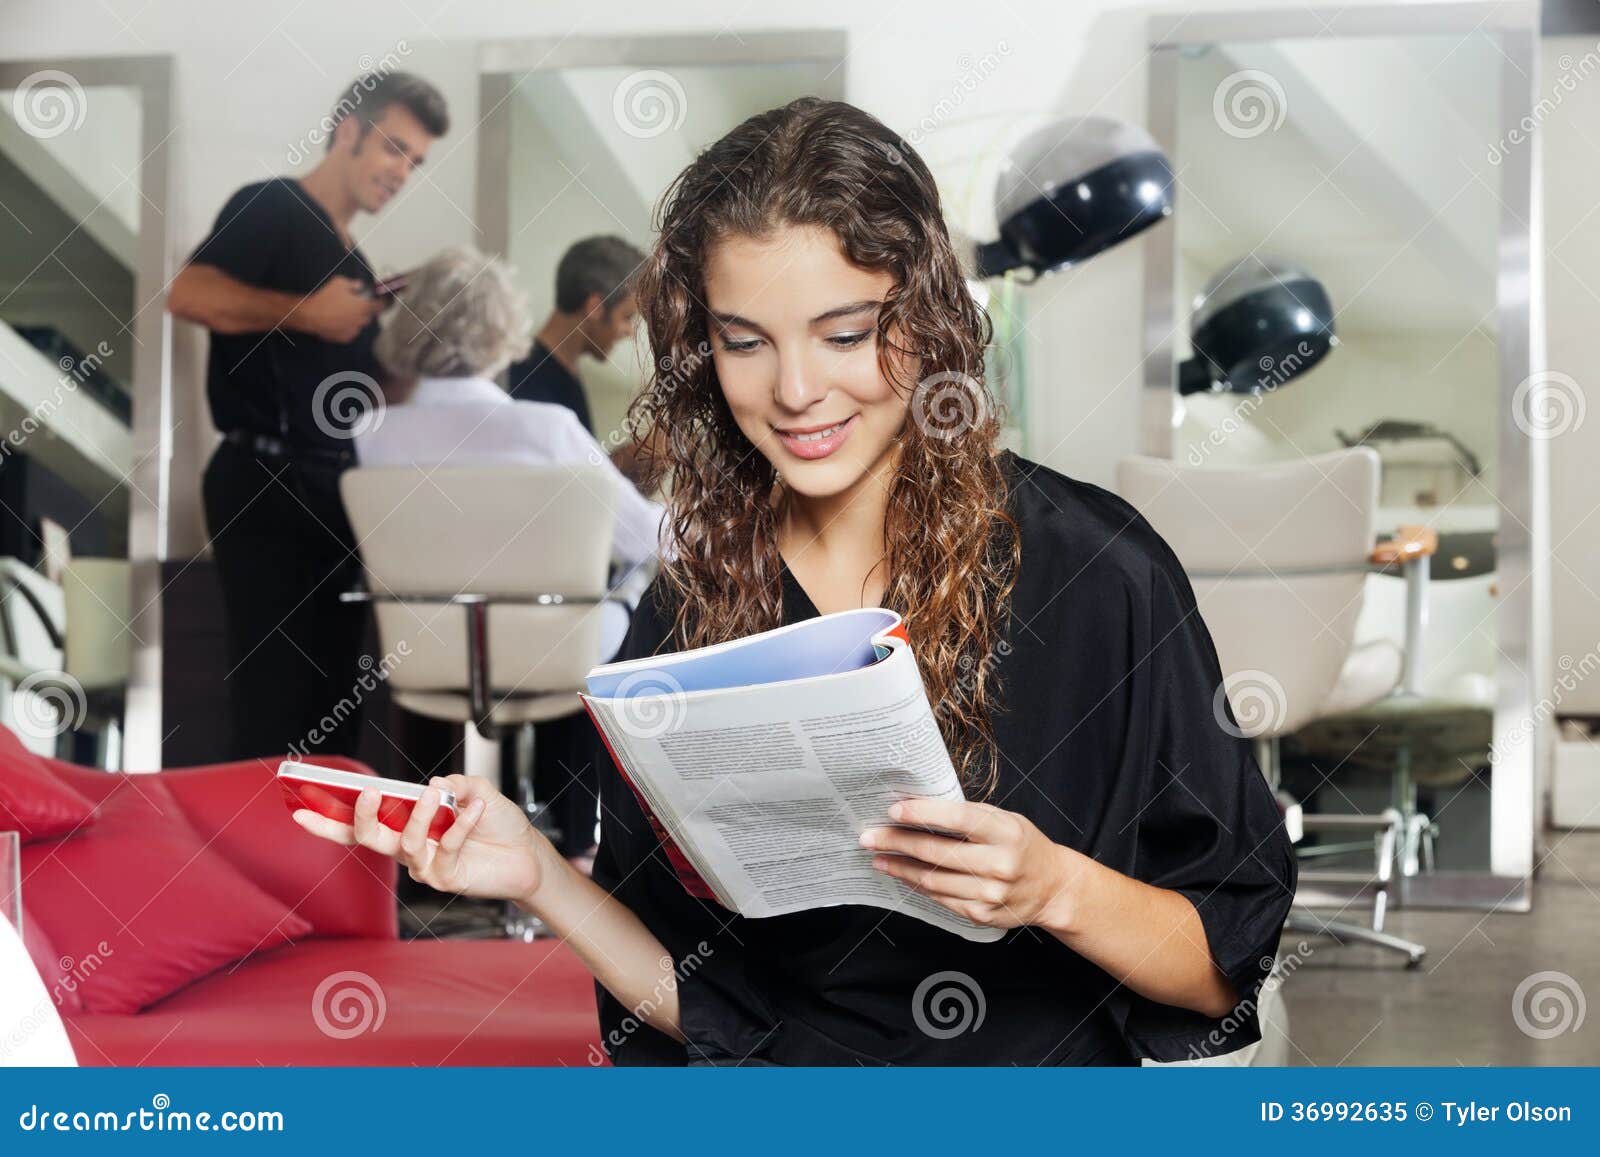 Woman With Mobile Phone Reading Magazine At Hair Stock Image